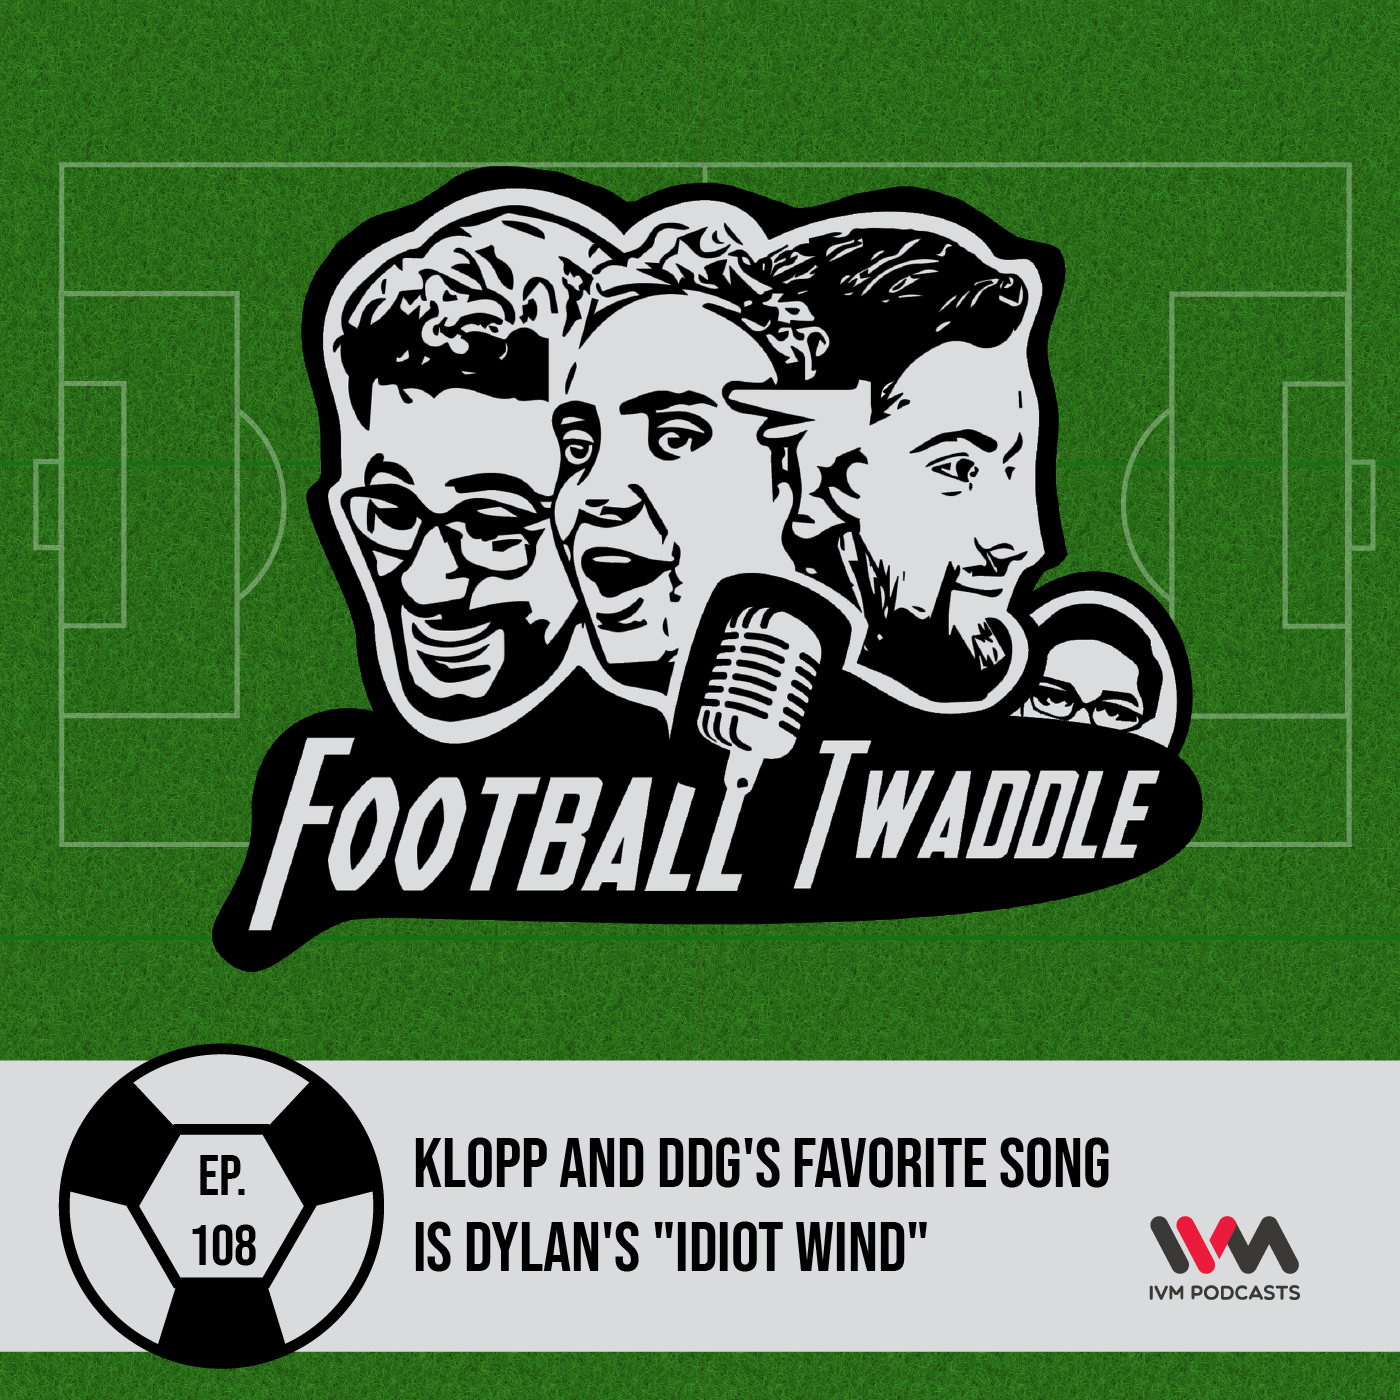 Klopp and DDG's favorite song is Dylan's 